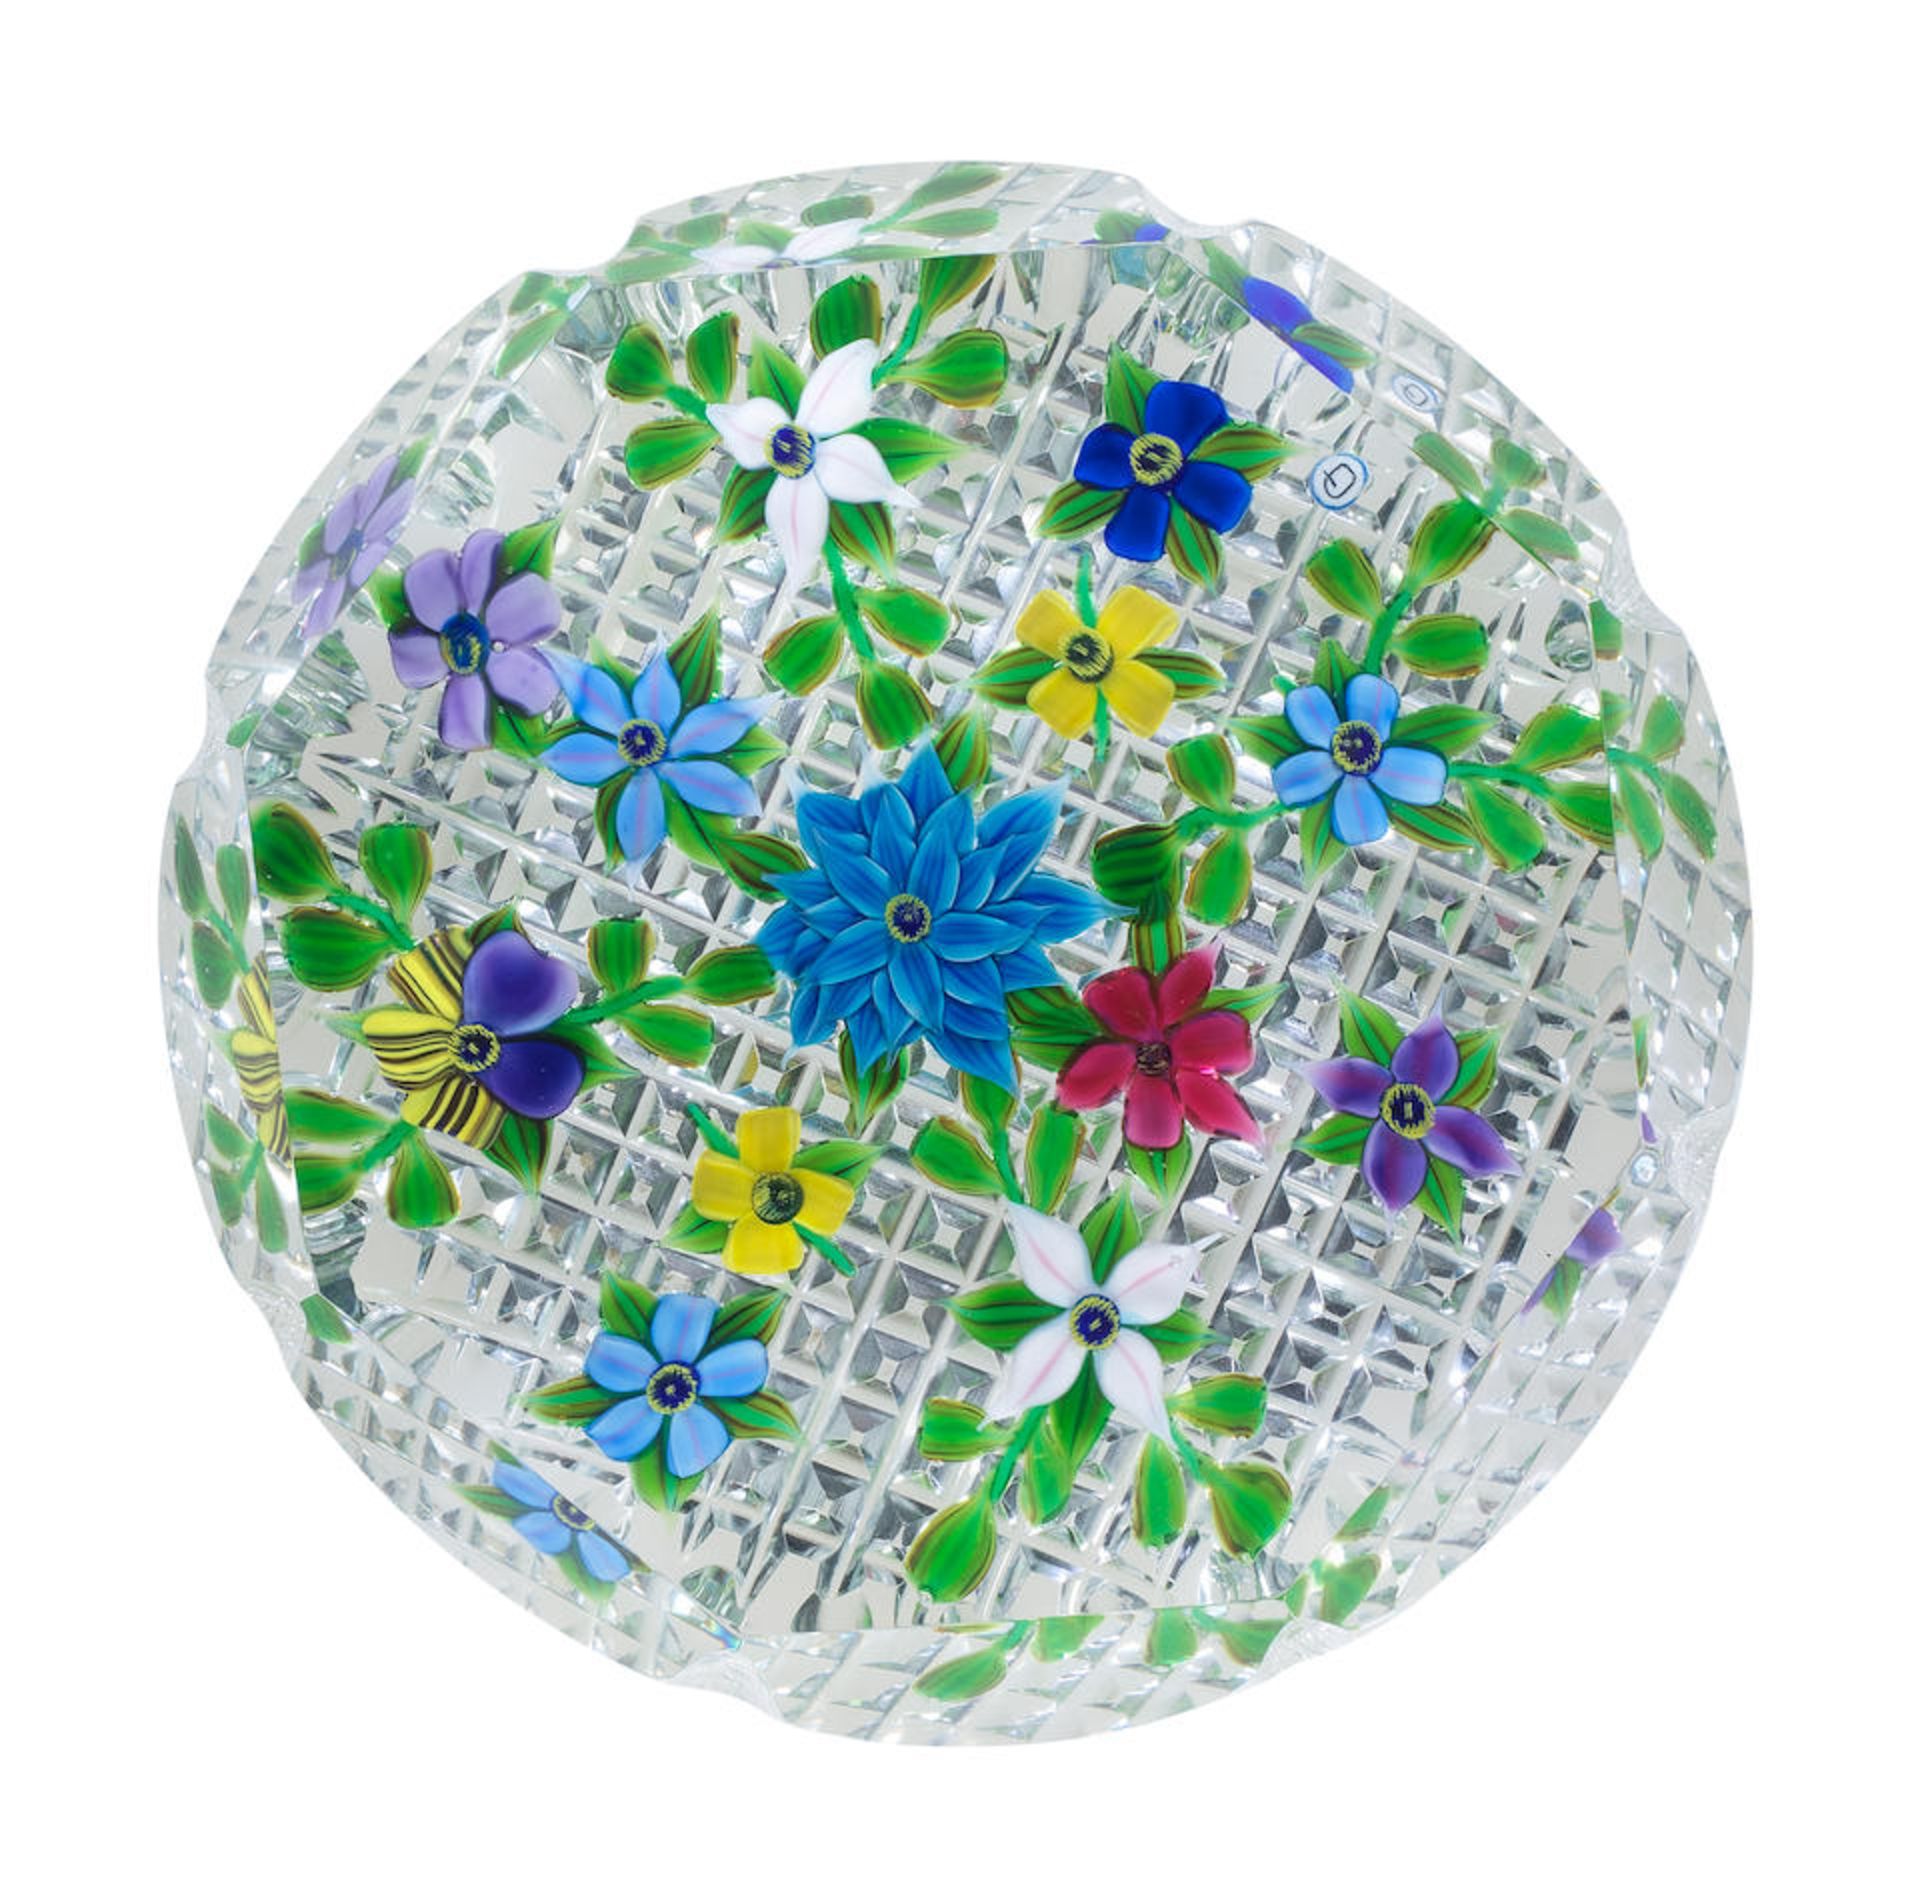 A Debbie Tarsitano faceted floral collage magnum paperweight, circa 1990